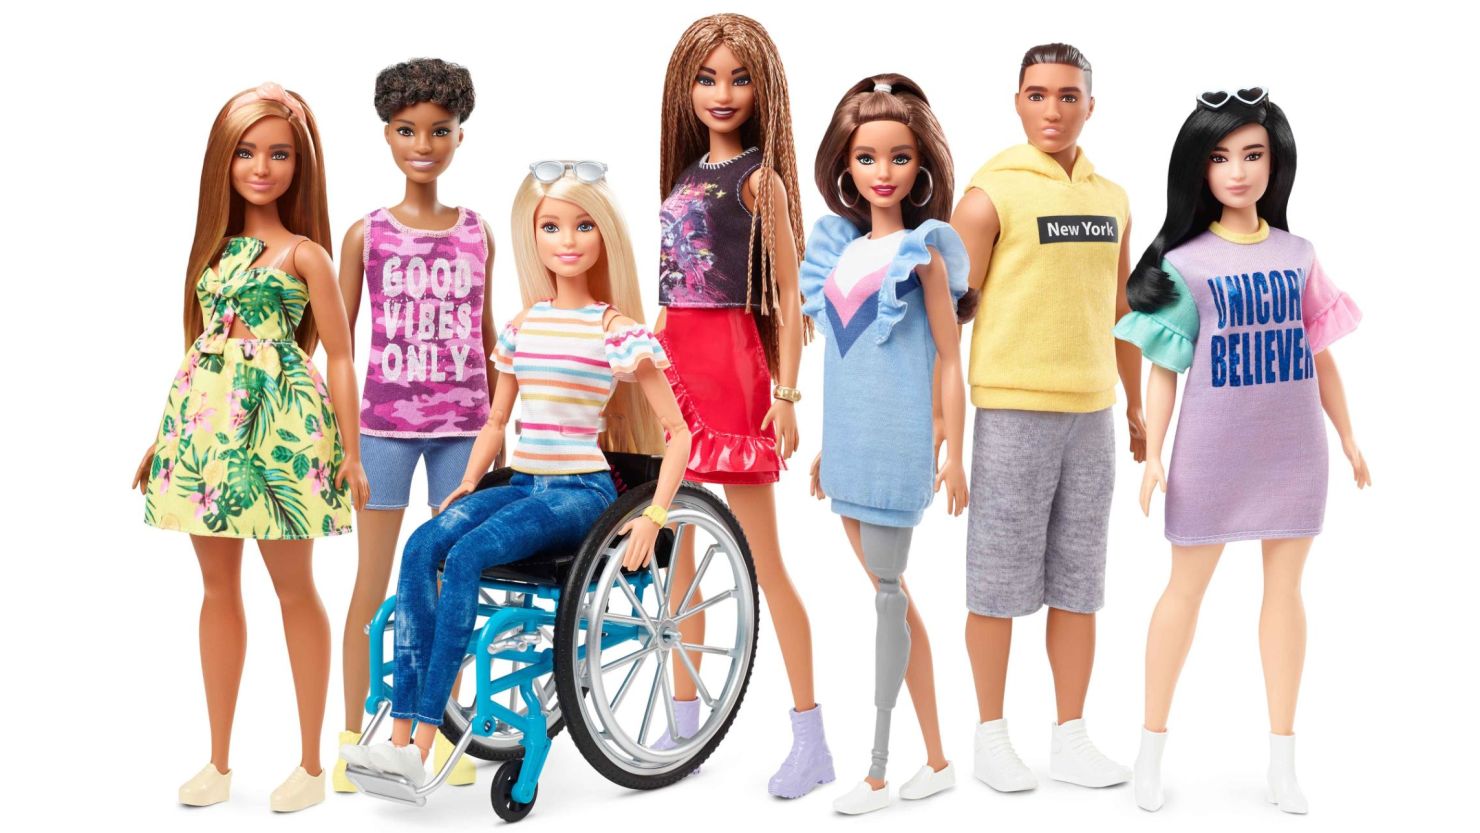 Travel Daisy (Barbie) head from her body to the wheelchair made to